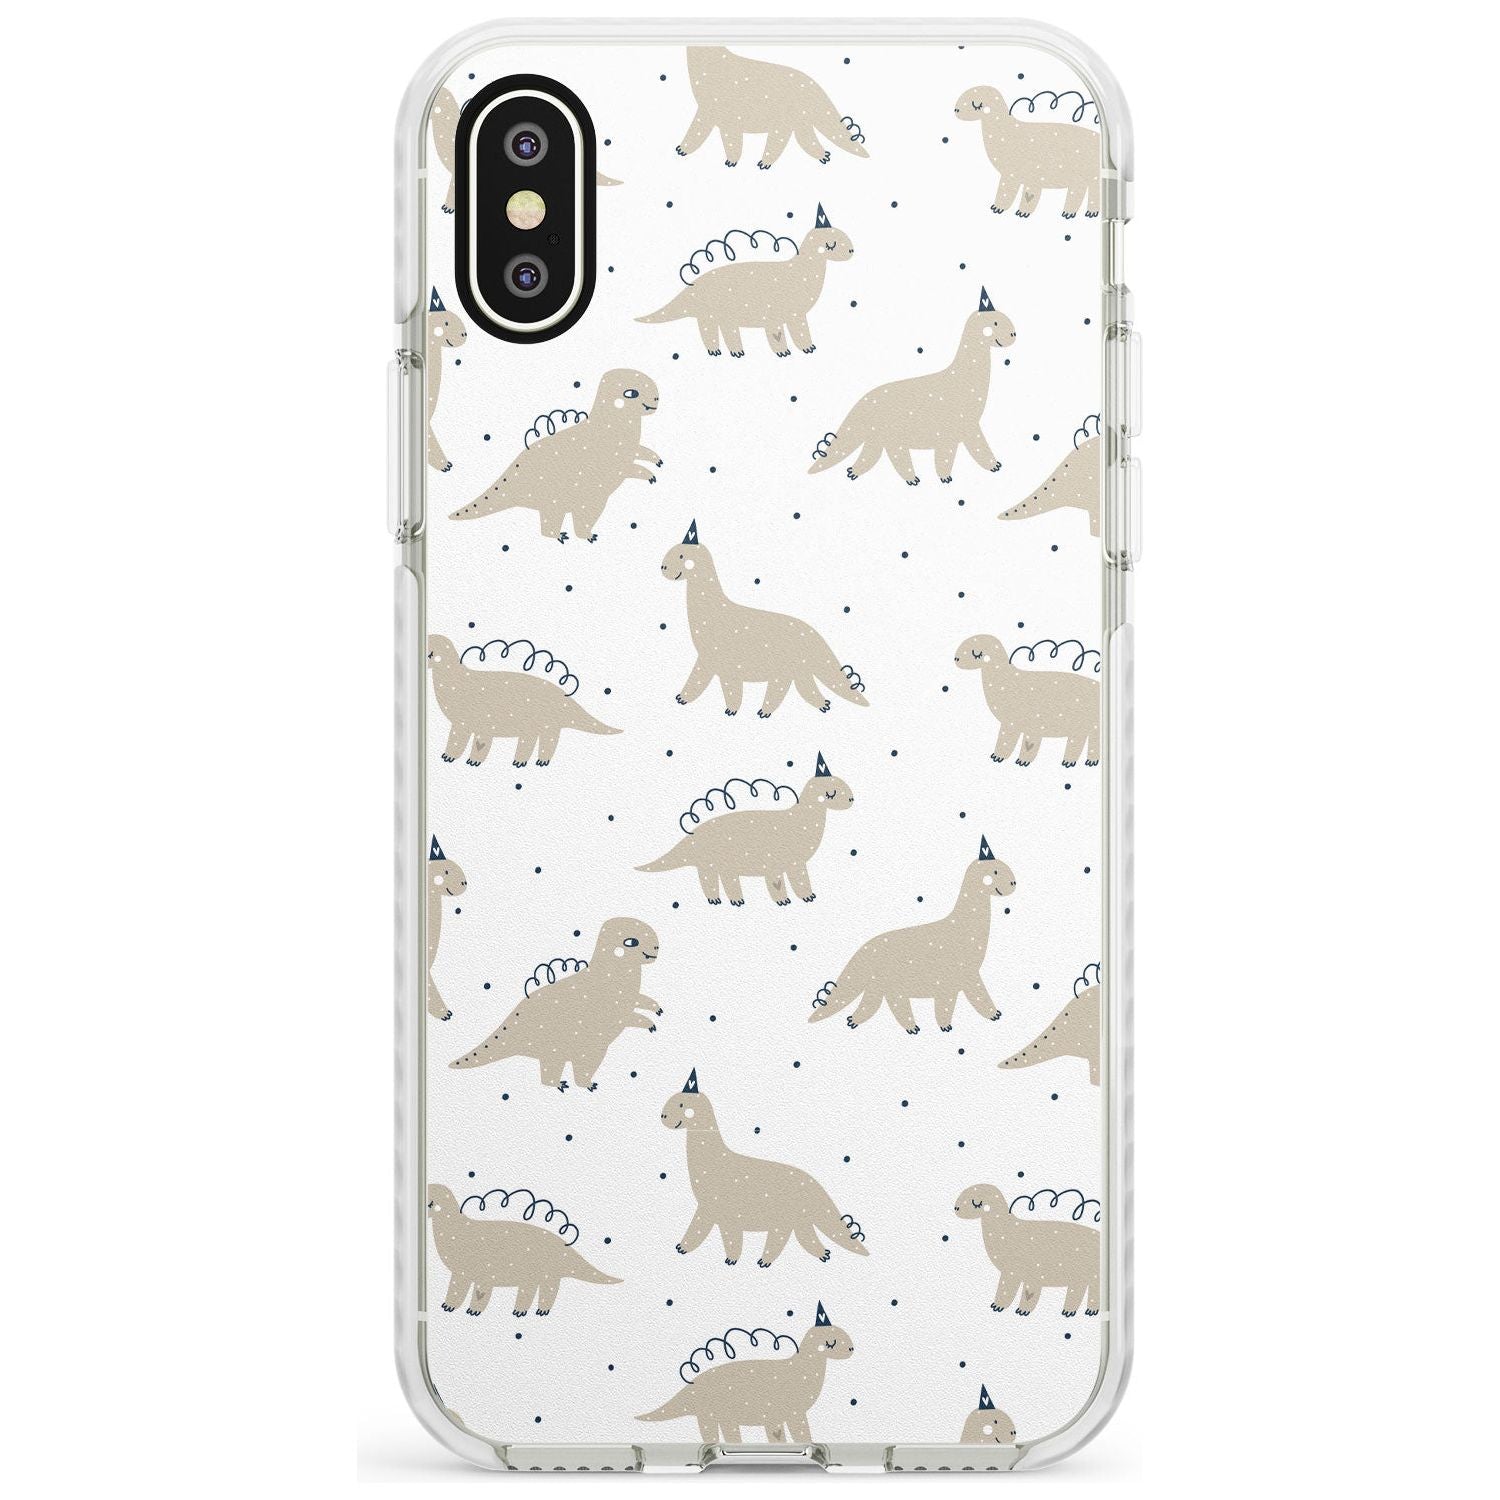 Adorable Dinosaurs Pattern Impact Phone Case for iPhone X XS Max XR